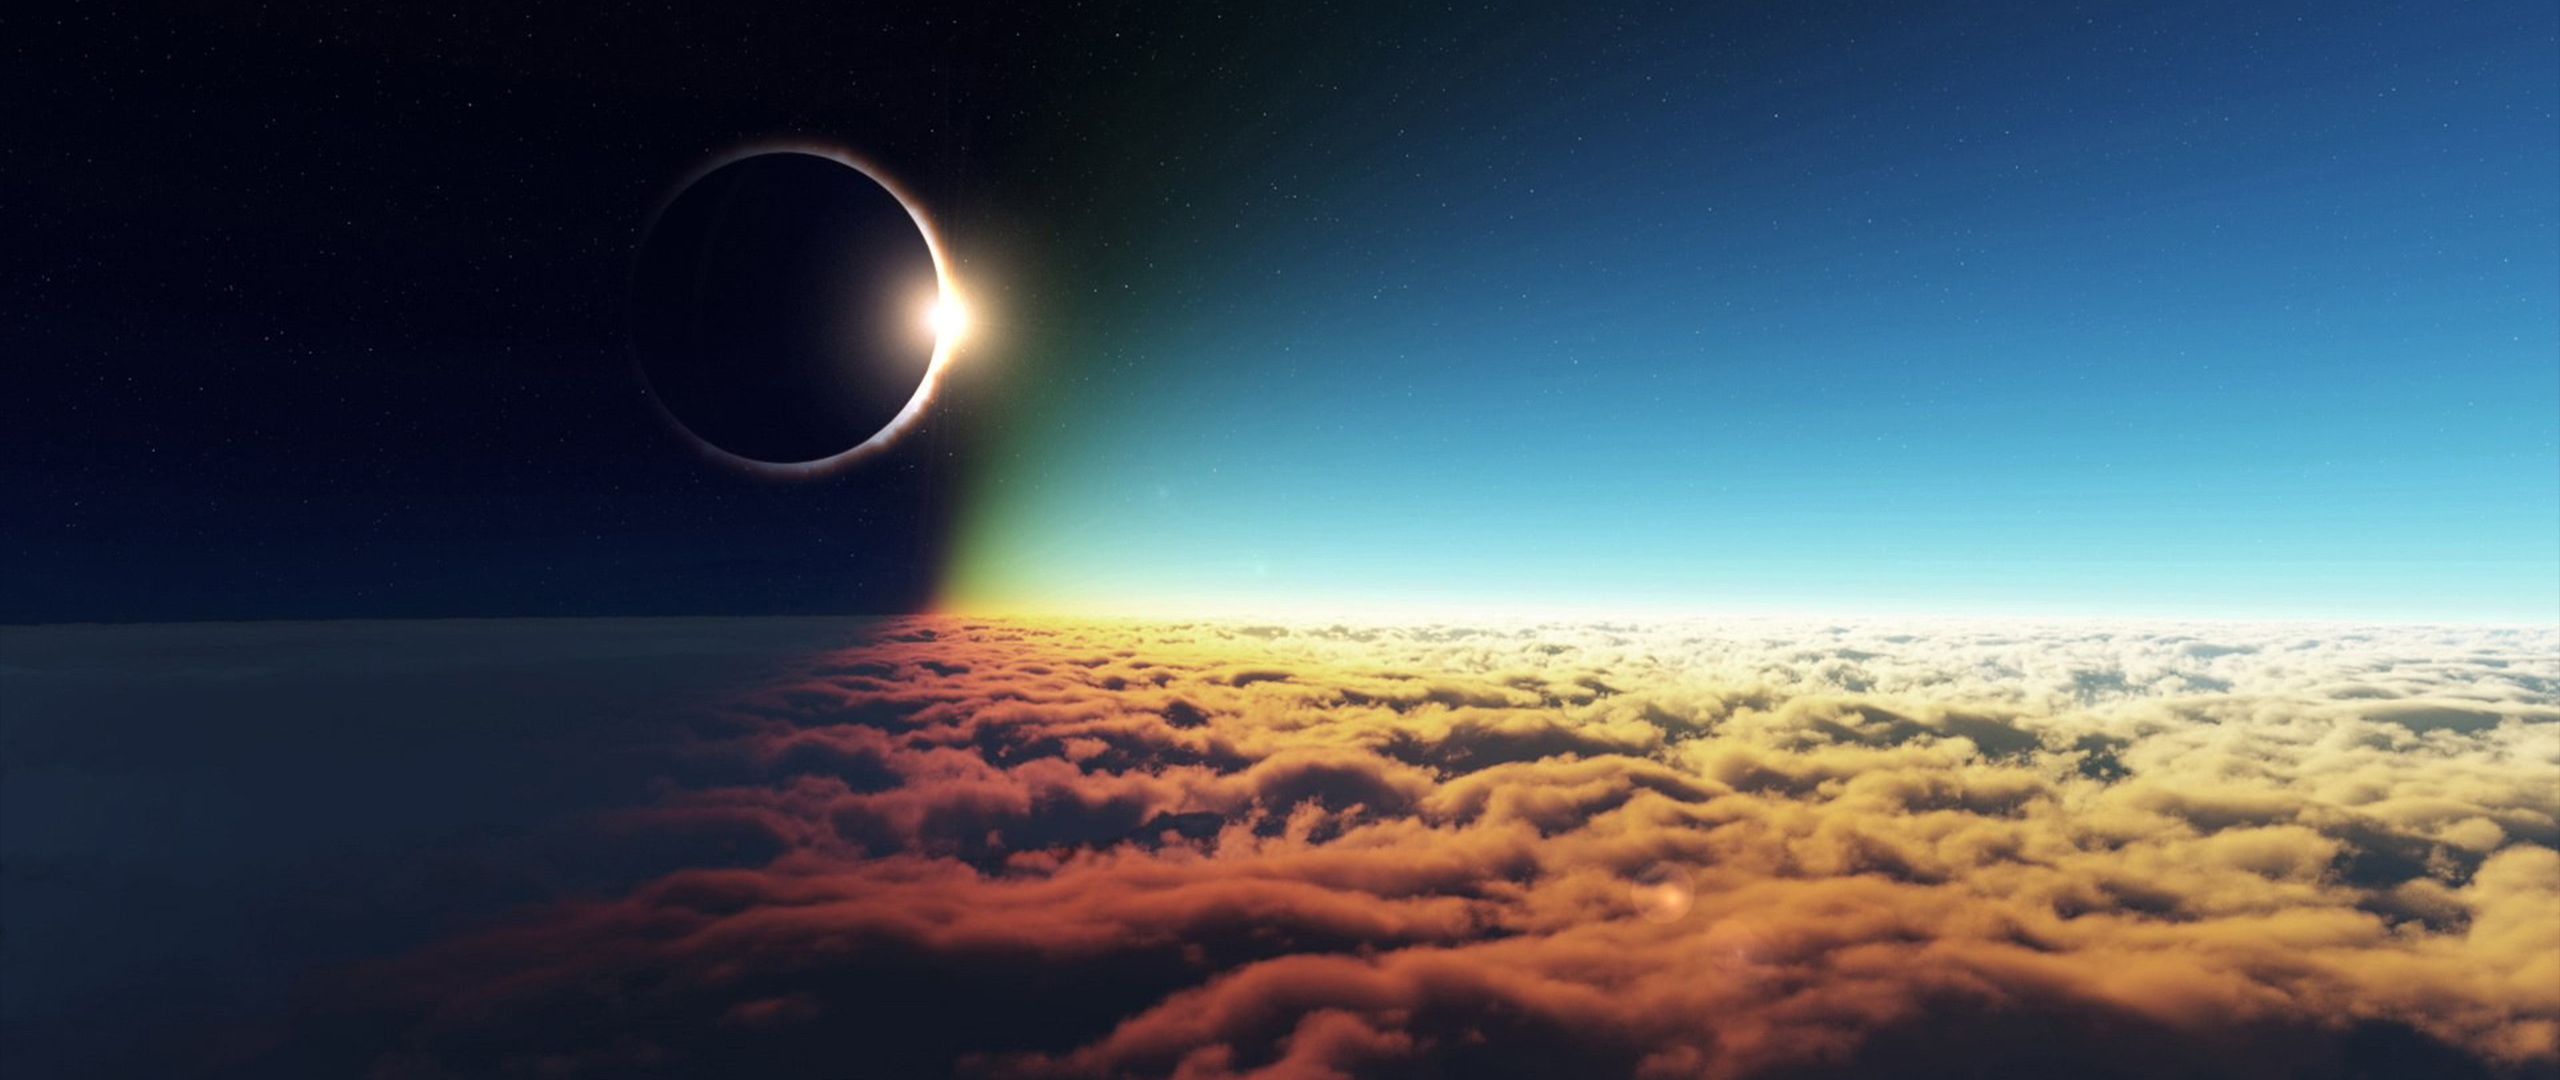 General 2560x1080 ultrawide photography sky solar eclipse eclipse  clouds sunlight